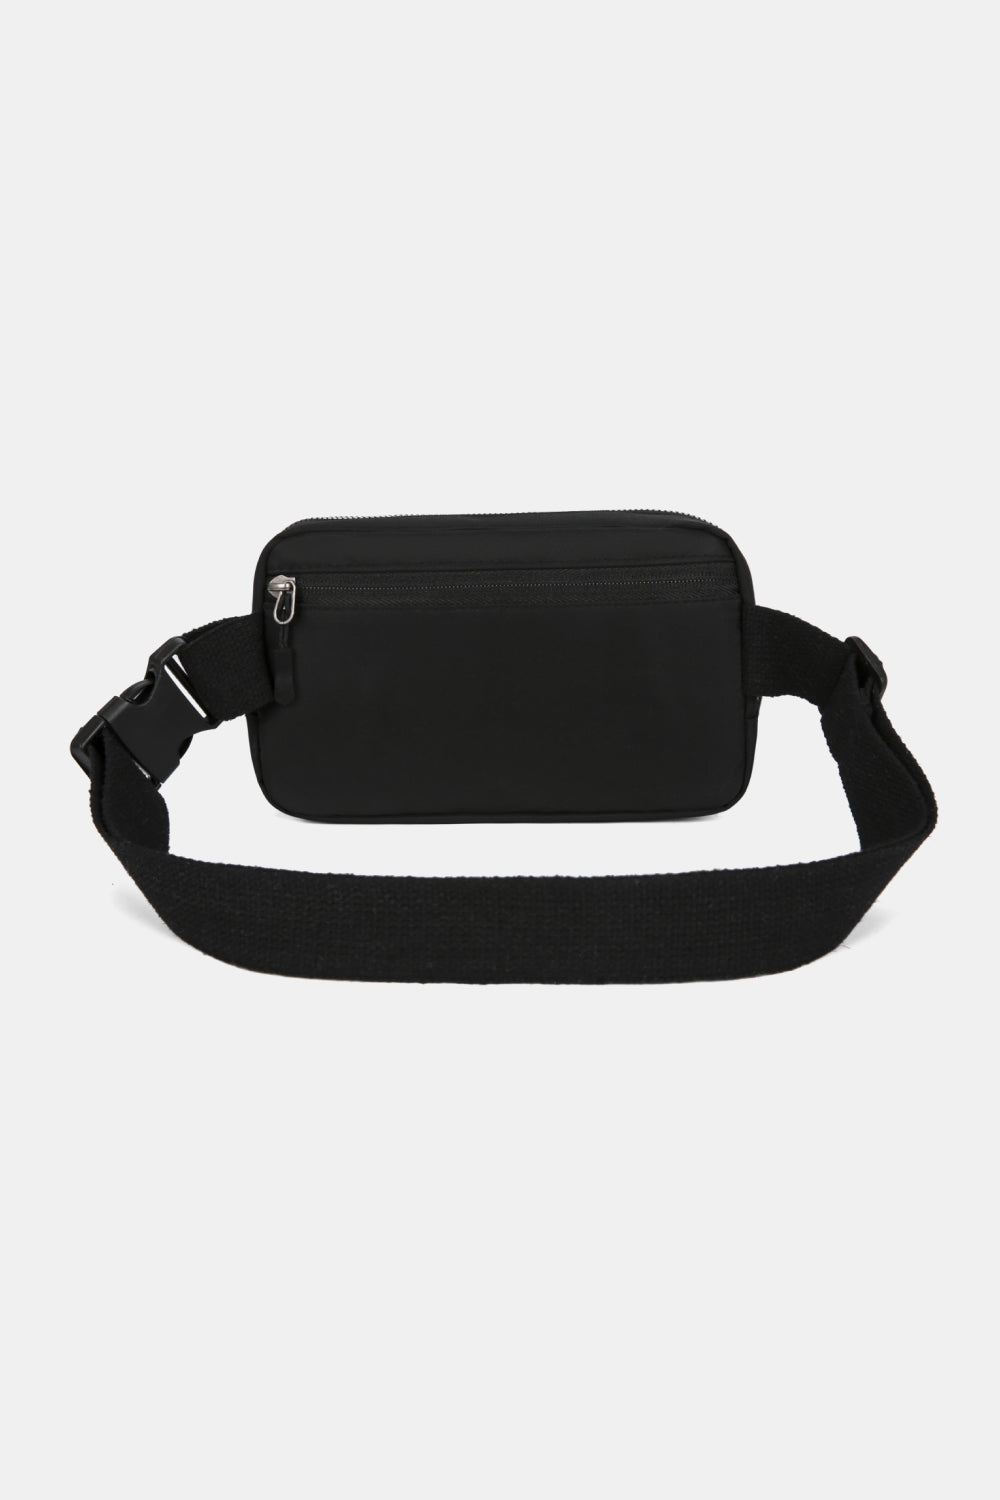 Black Nylon Fanny Pack Sentient Beauty Fashions bags & totes